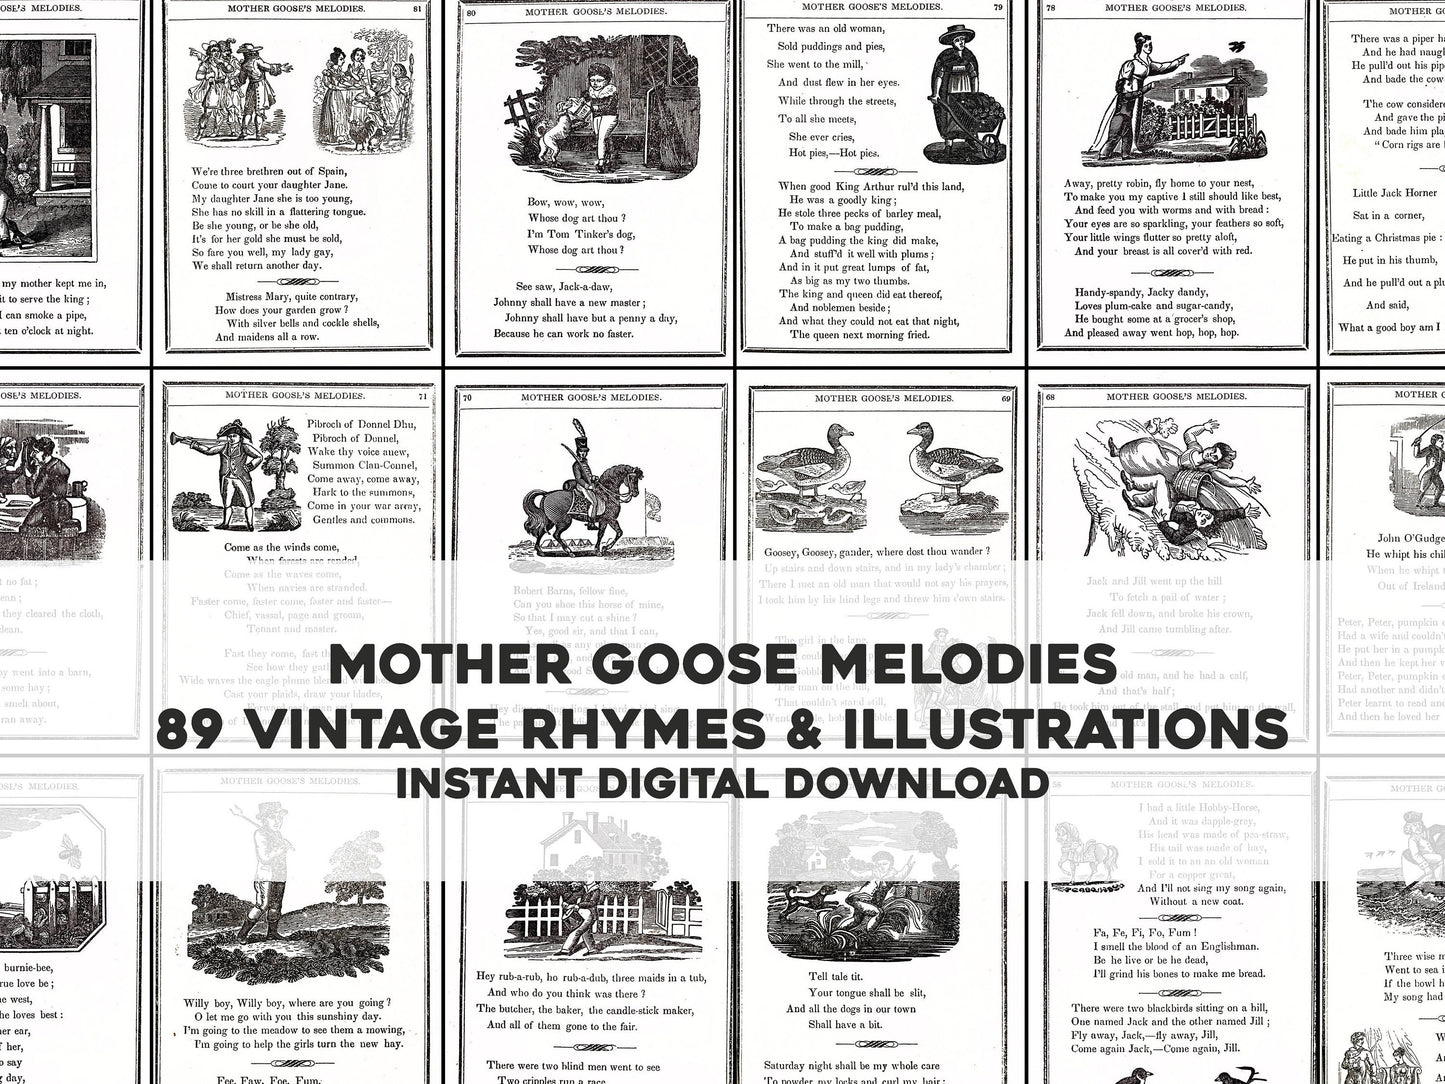 Mother Goose Melodies [89 Images]